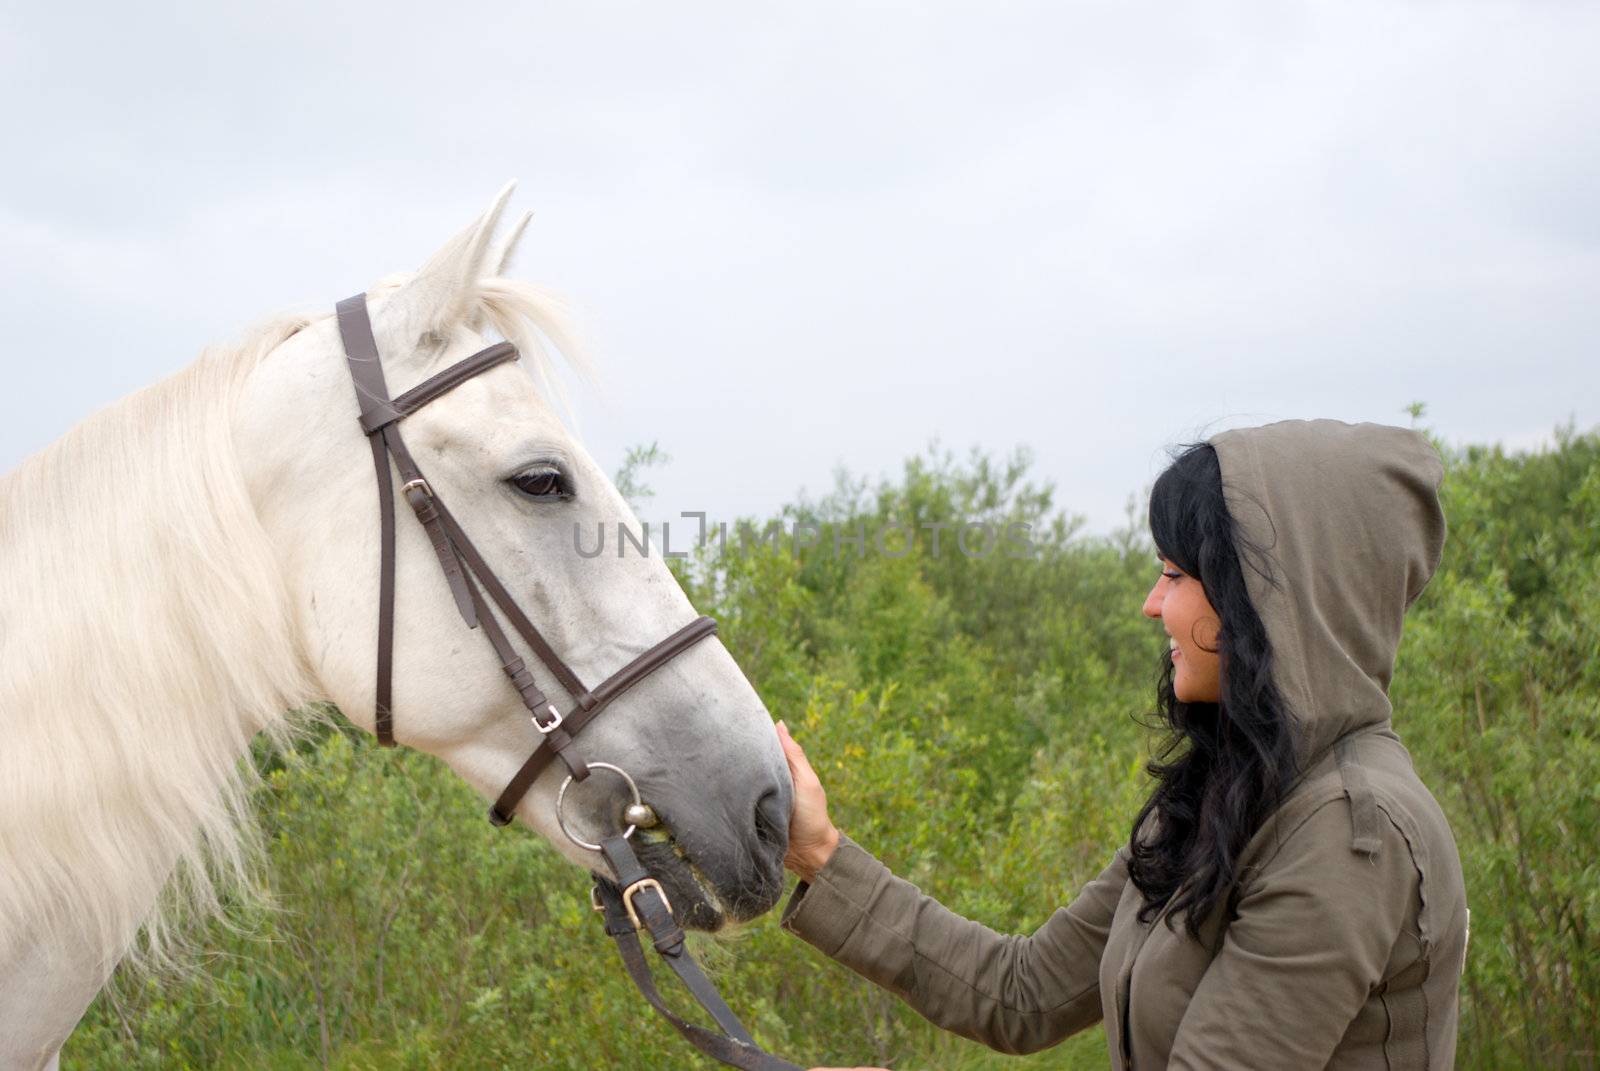 the romantic girl and horse.Contact with nature